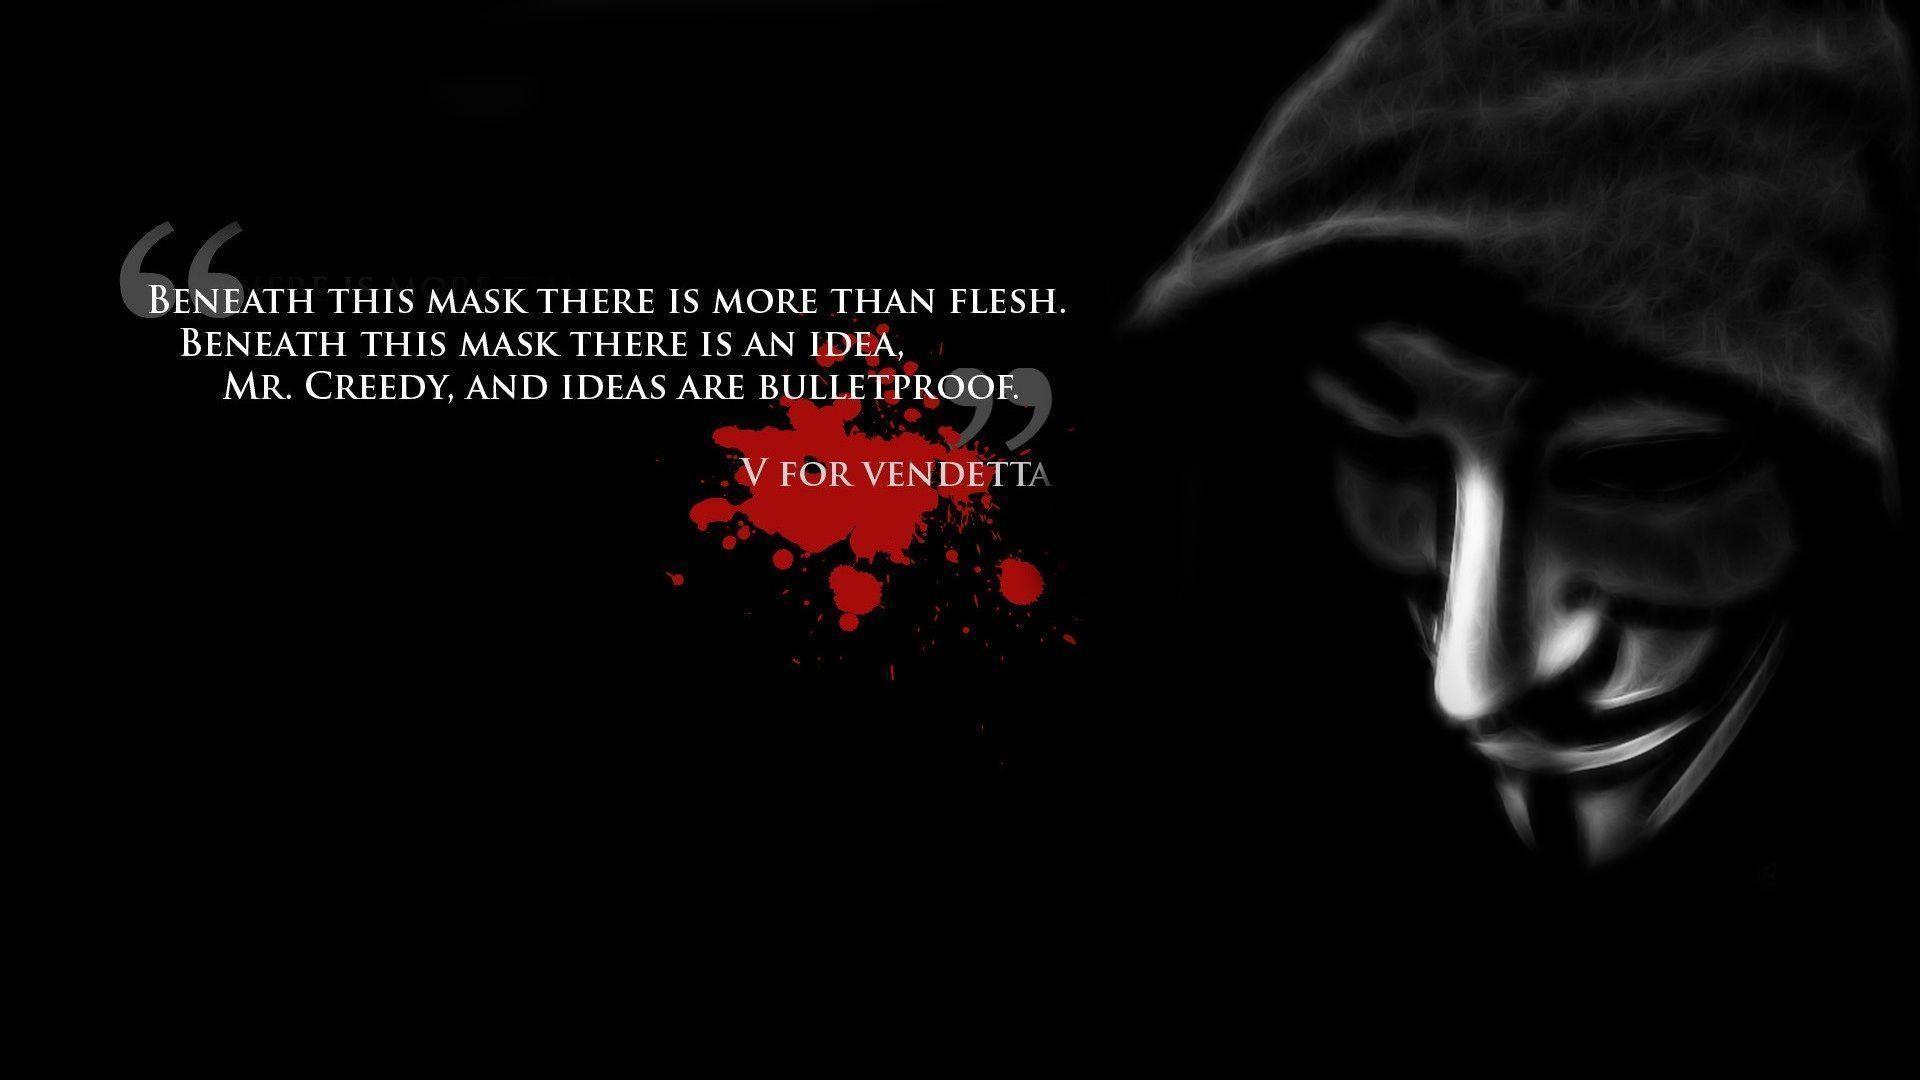 movies v for vendetta 1920x1080 wallpapers entertainment movies hd